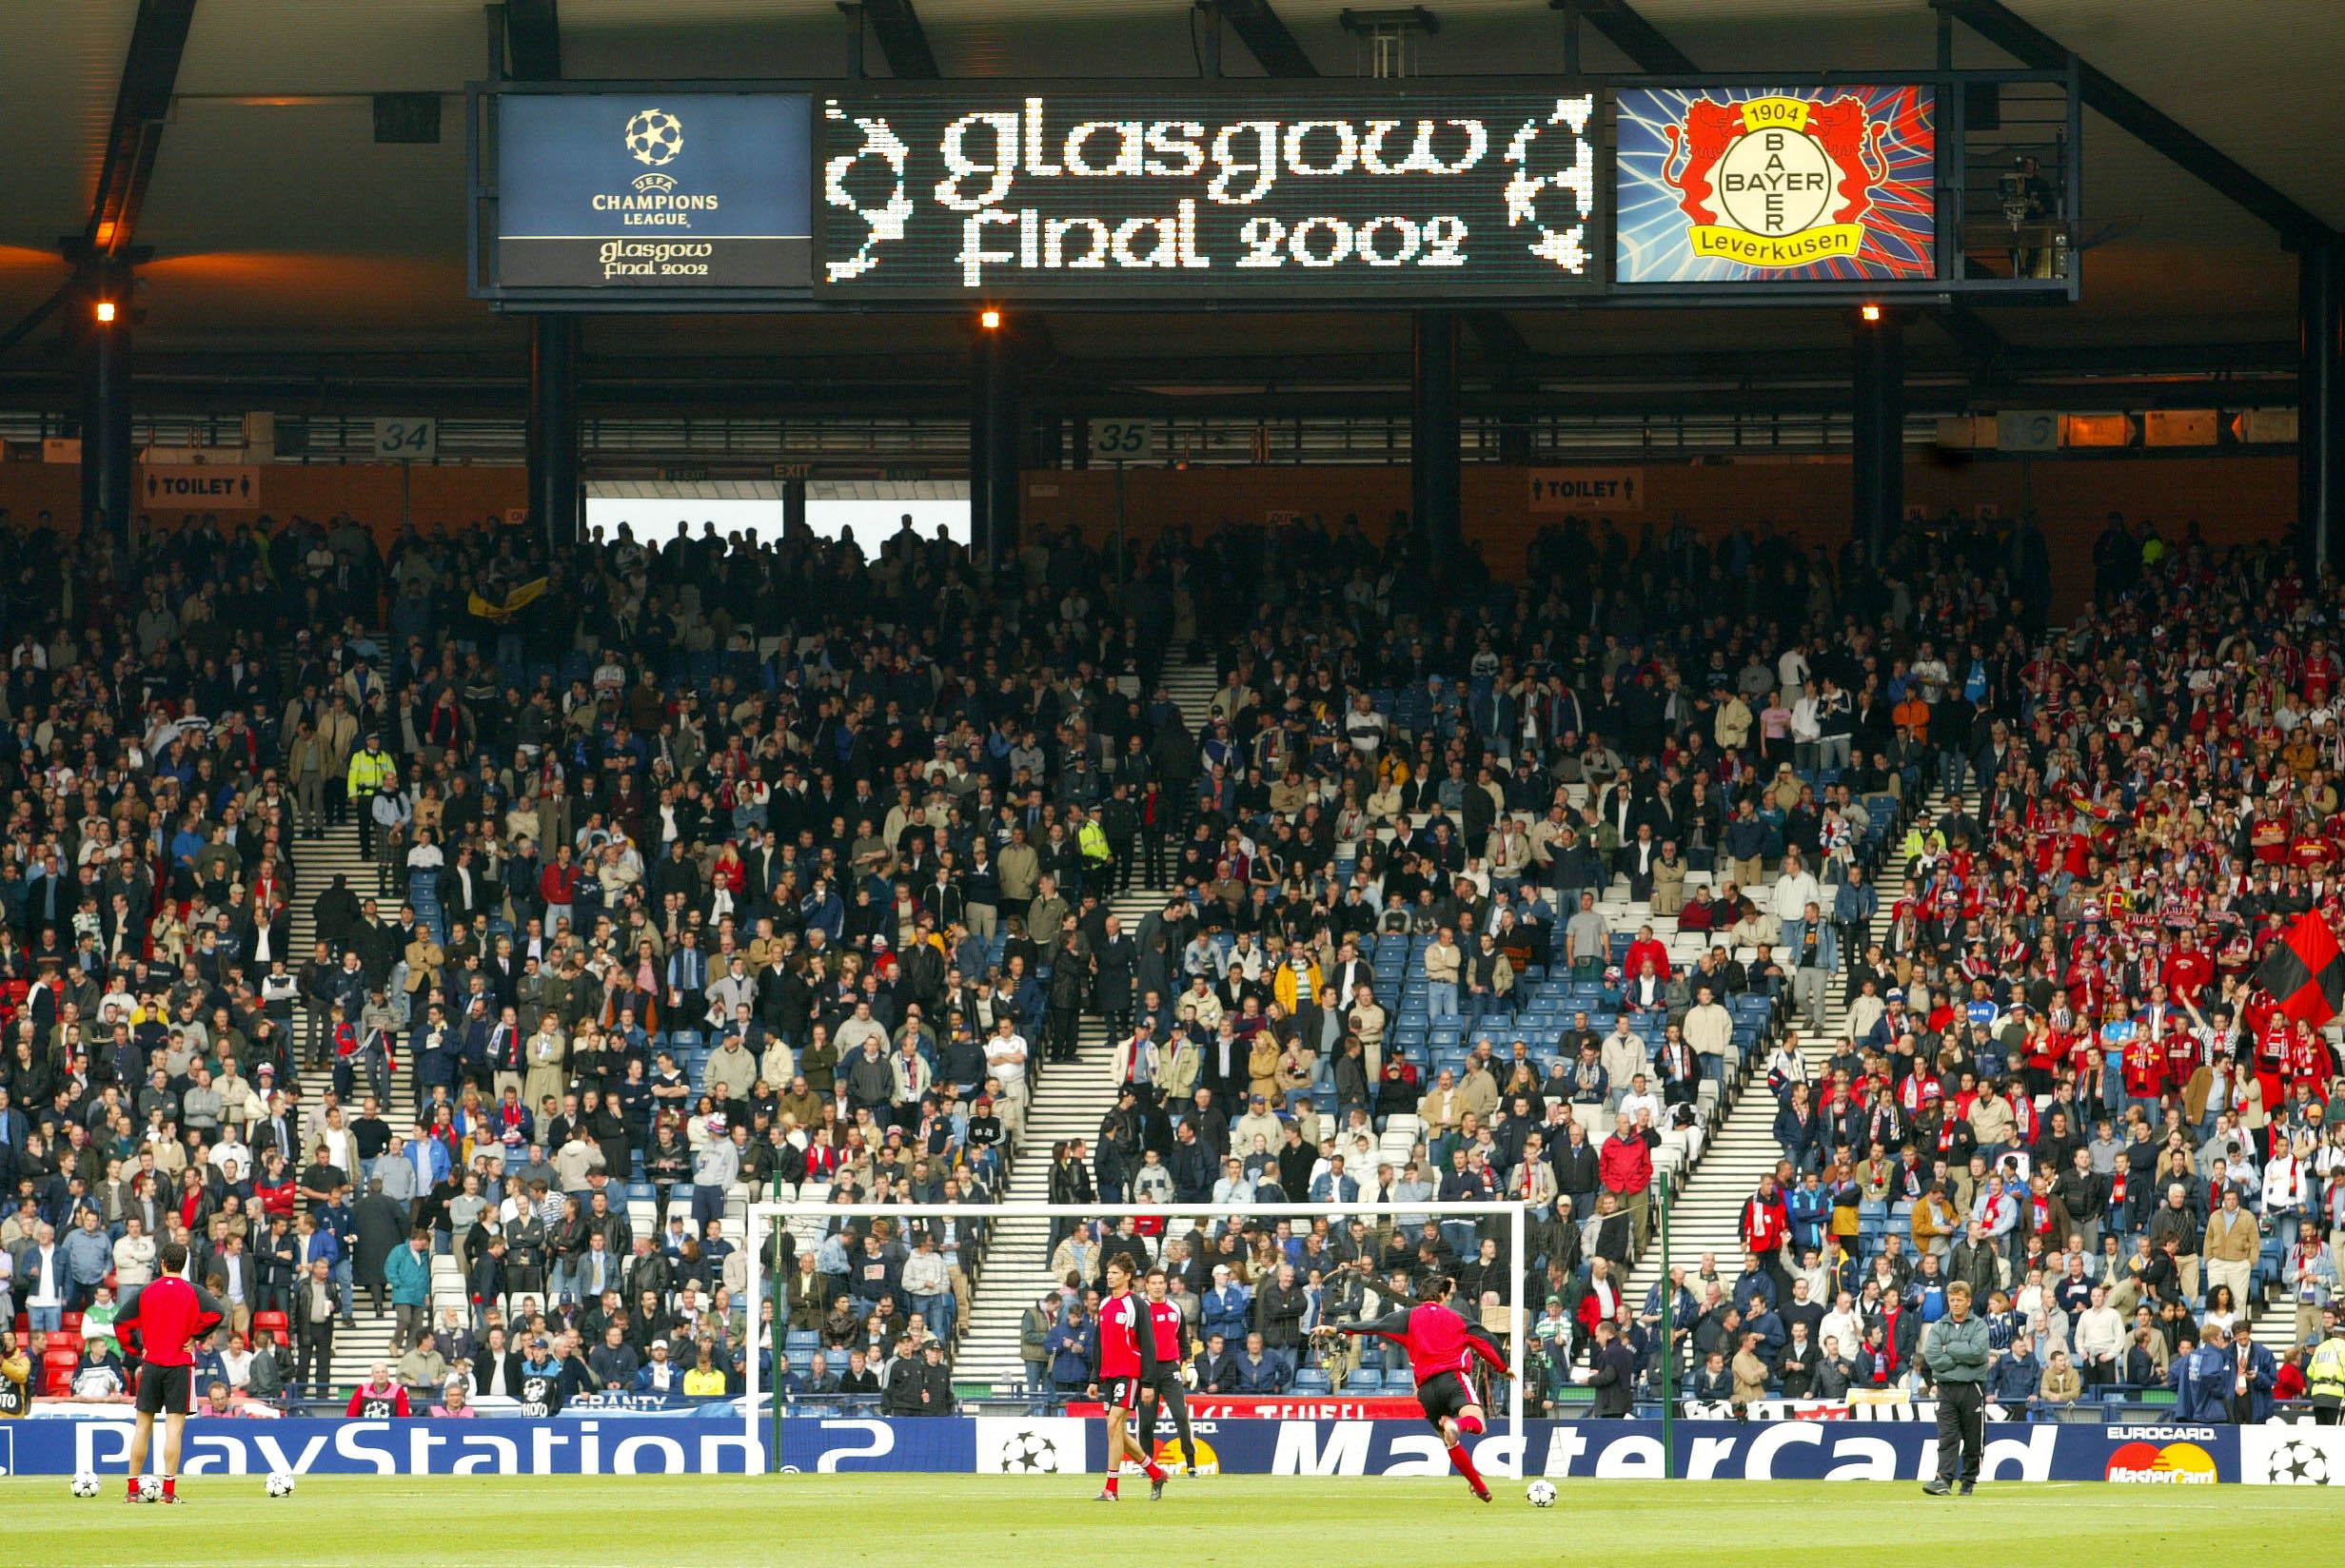 Hampden was full for the Champions League final.